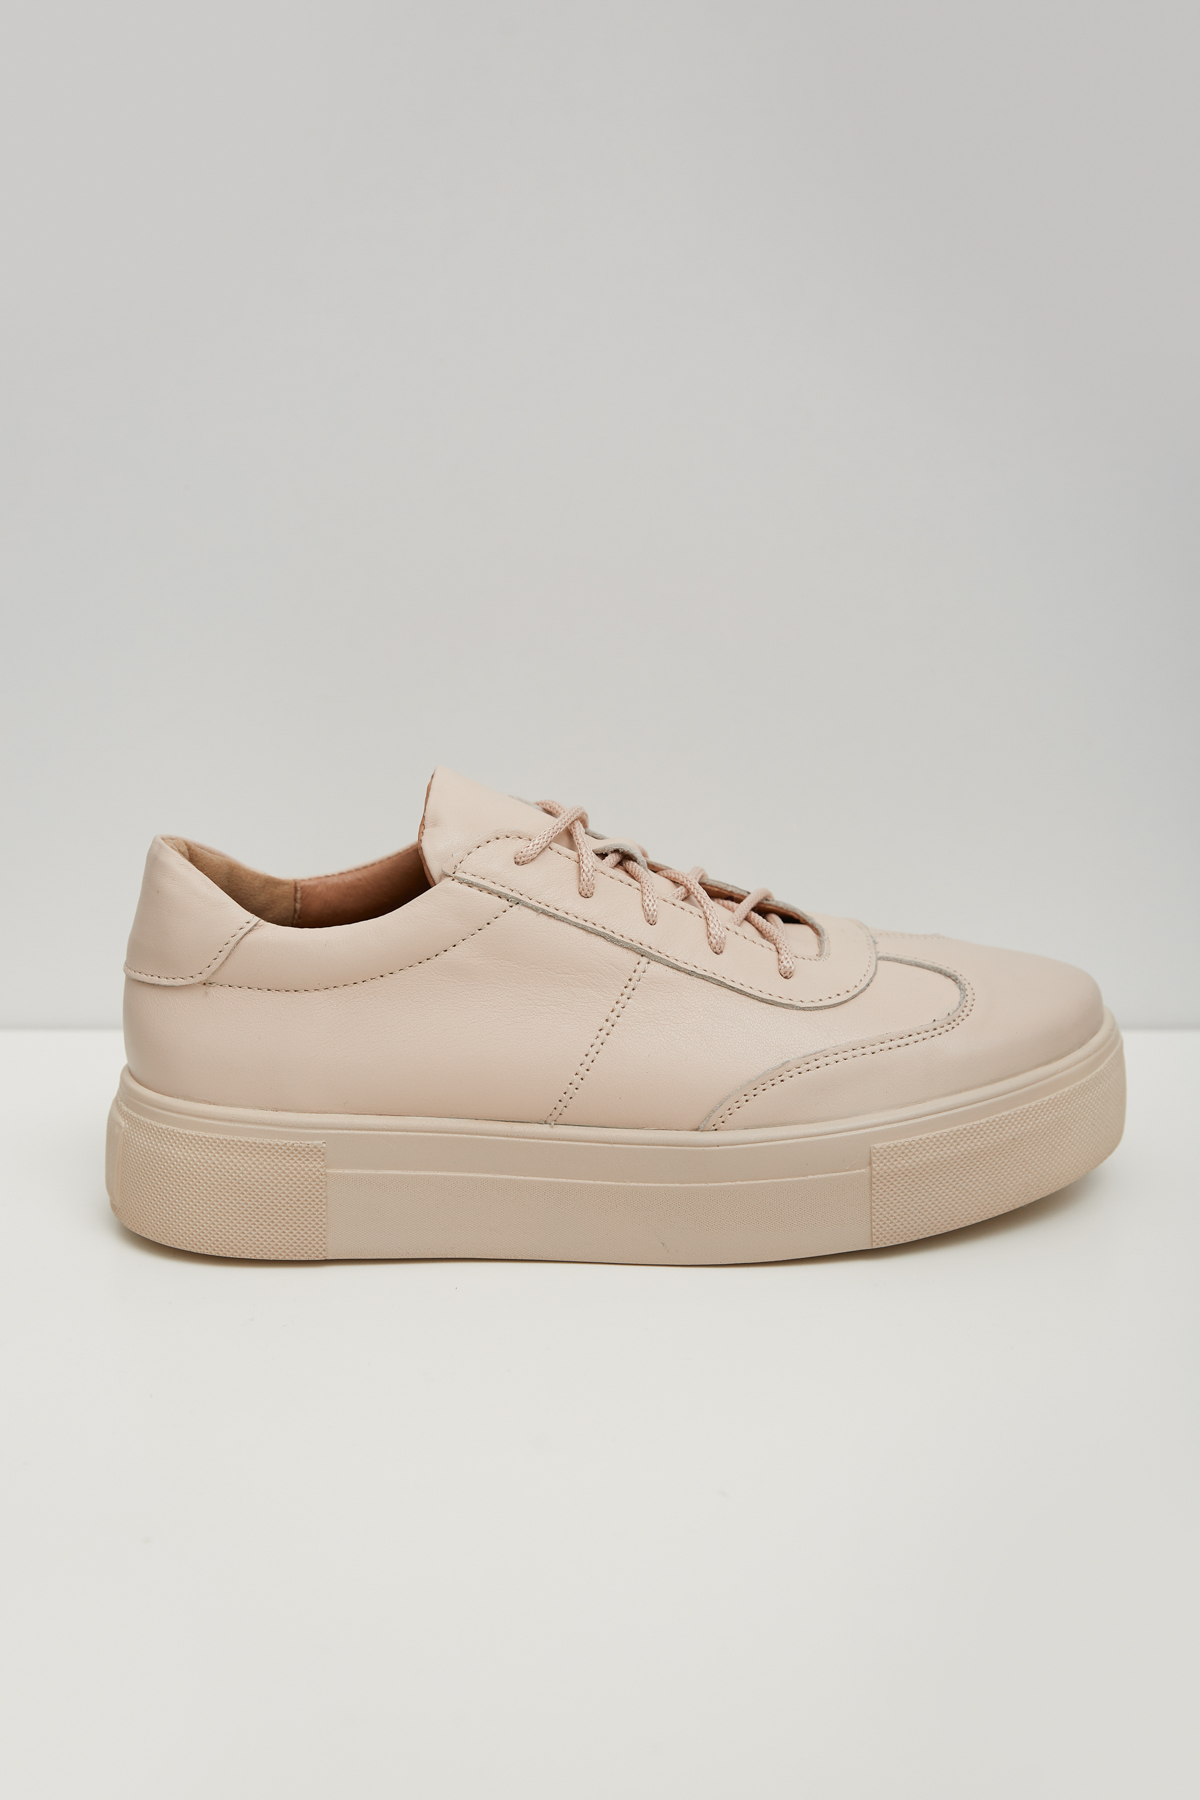 Beige leather sneakers with thick soles, photo 2